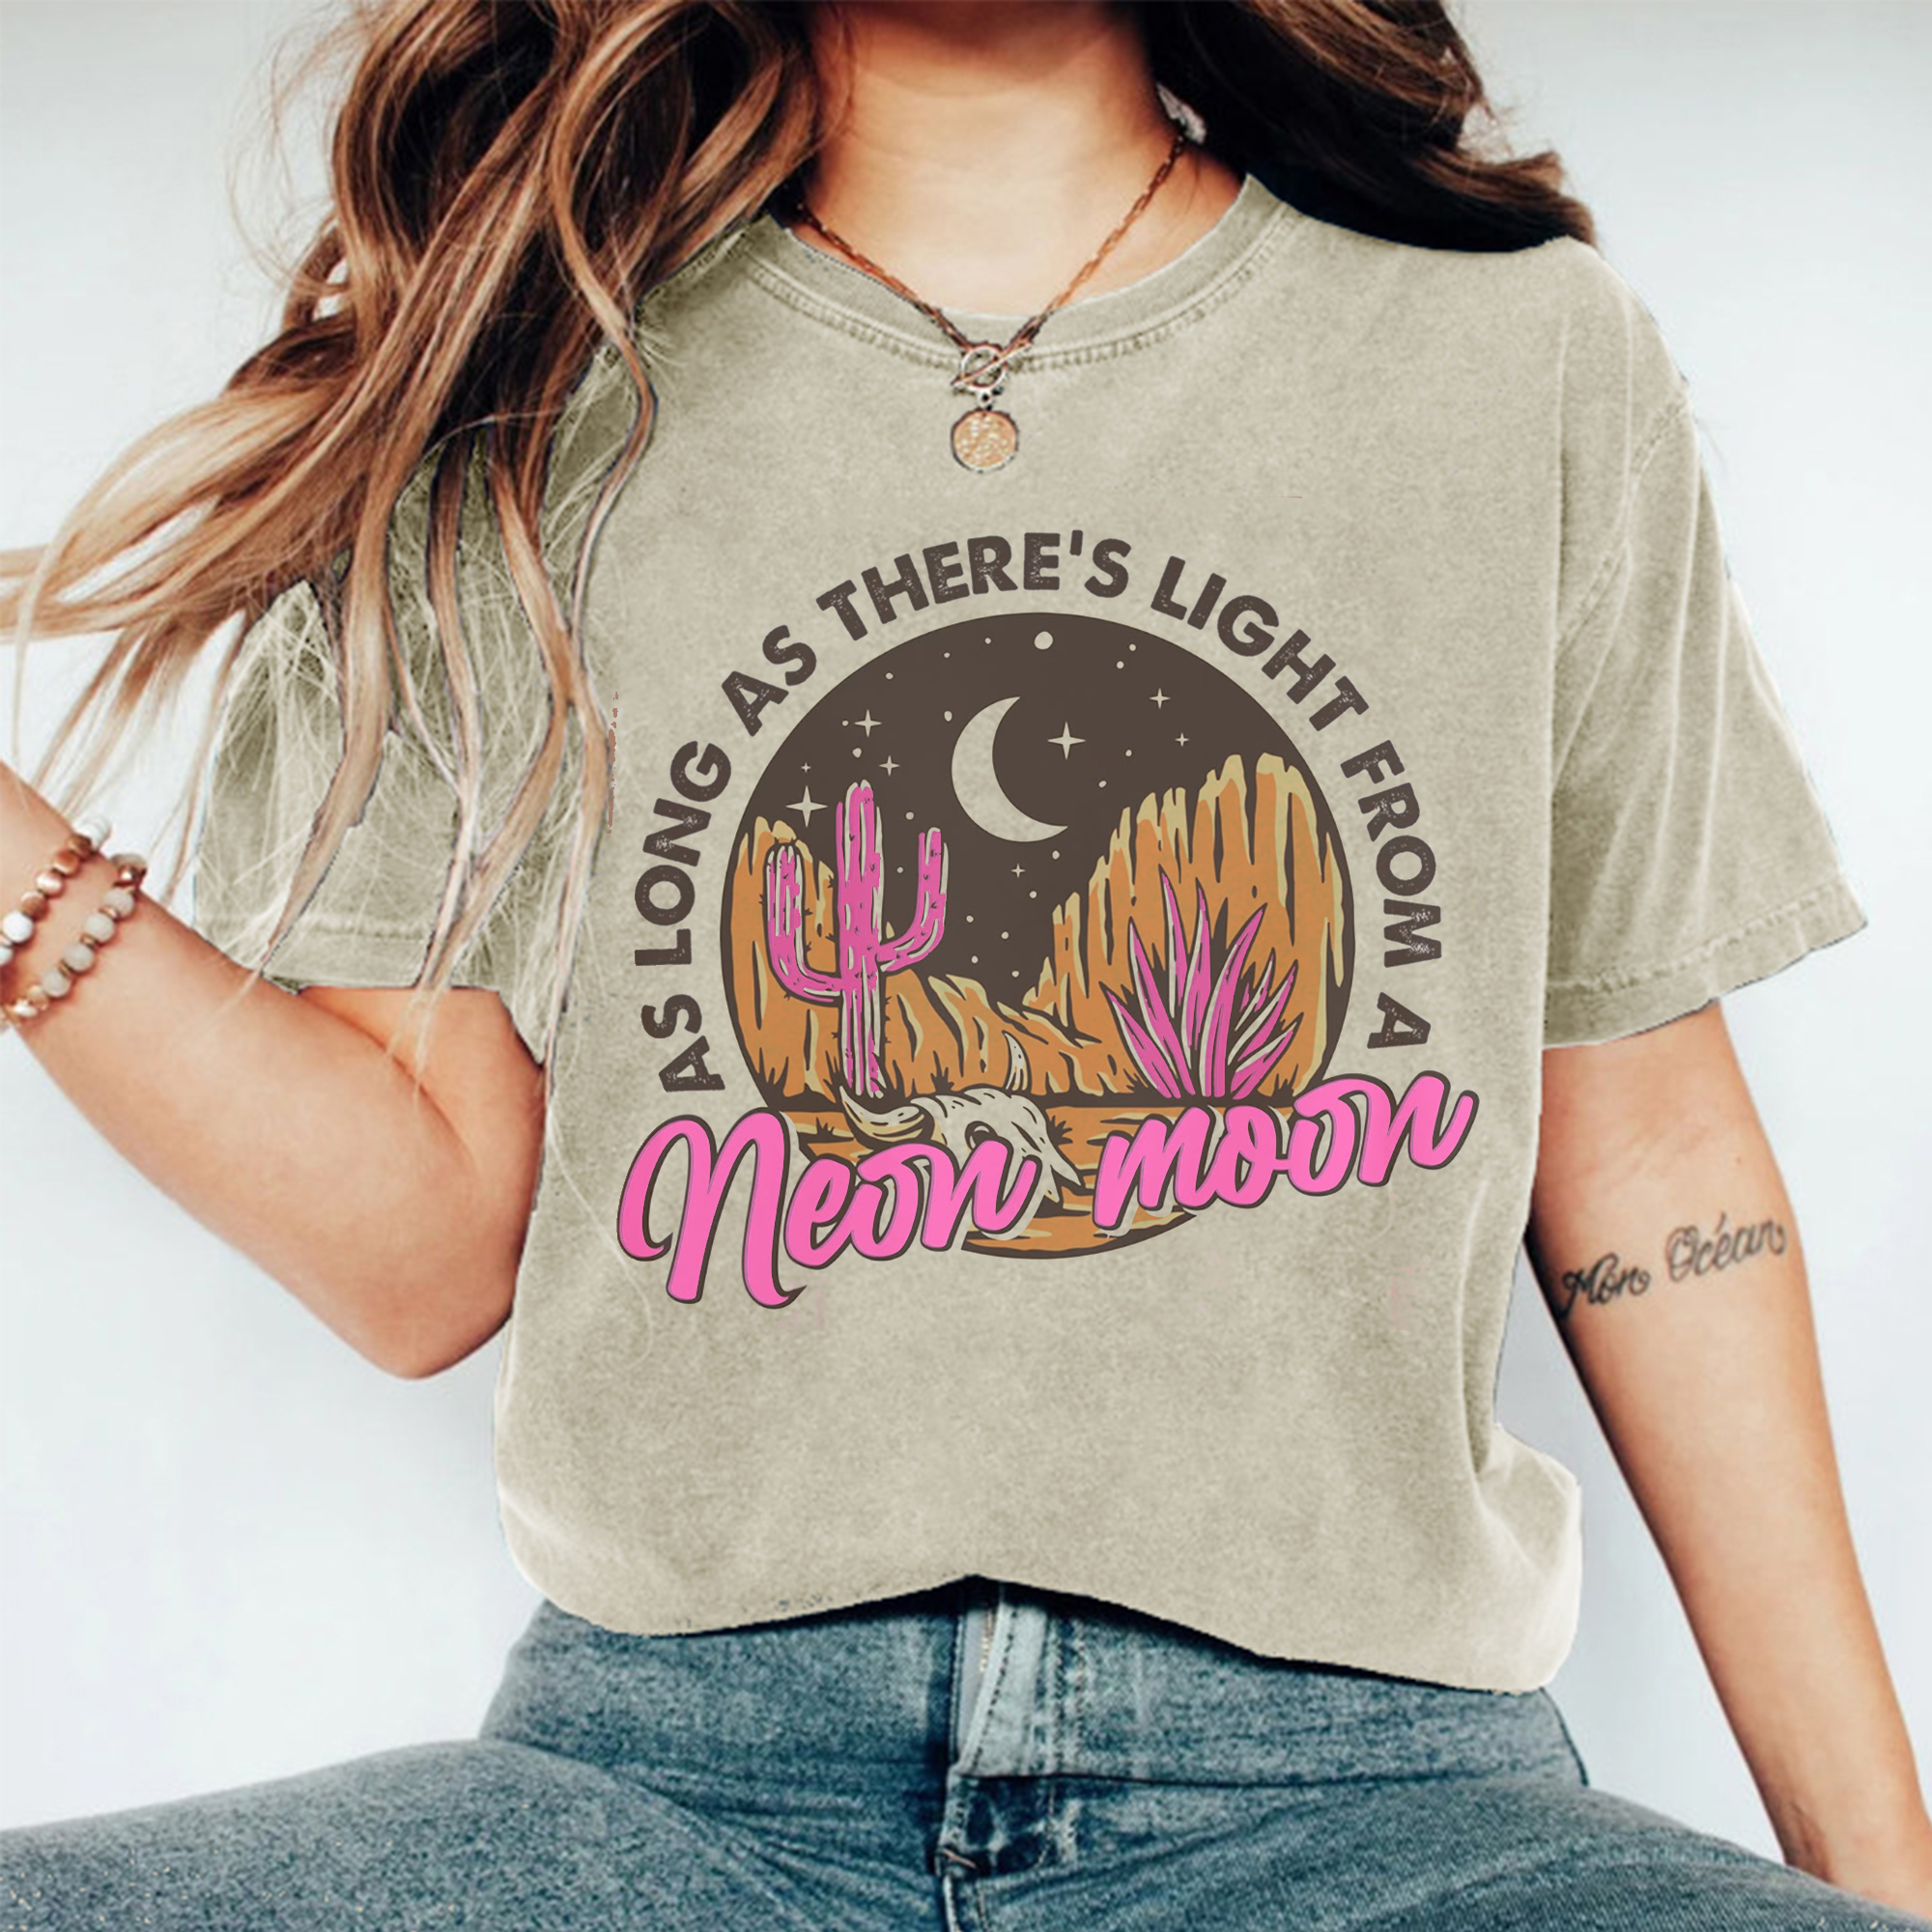 There's Light from Neon Moon T-shirt